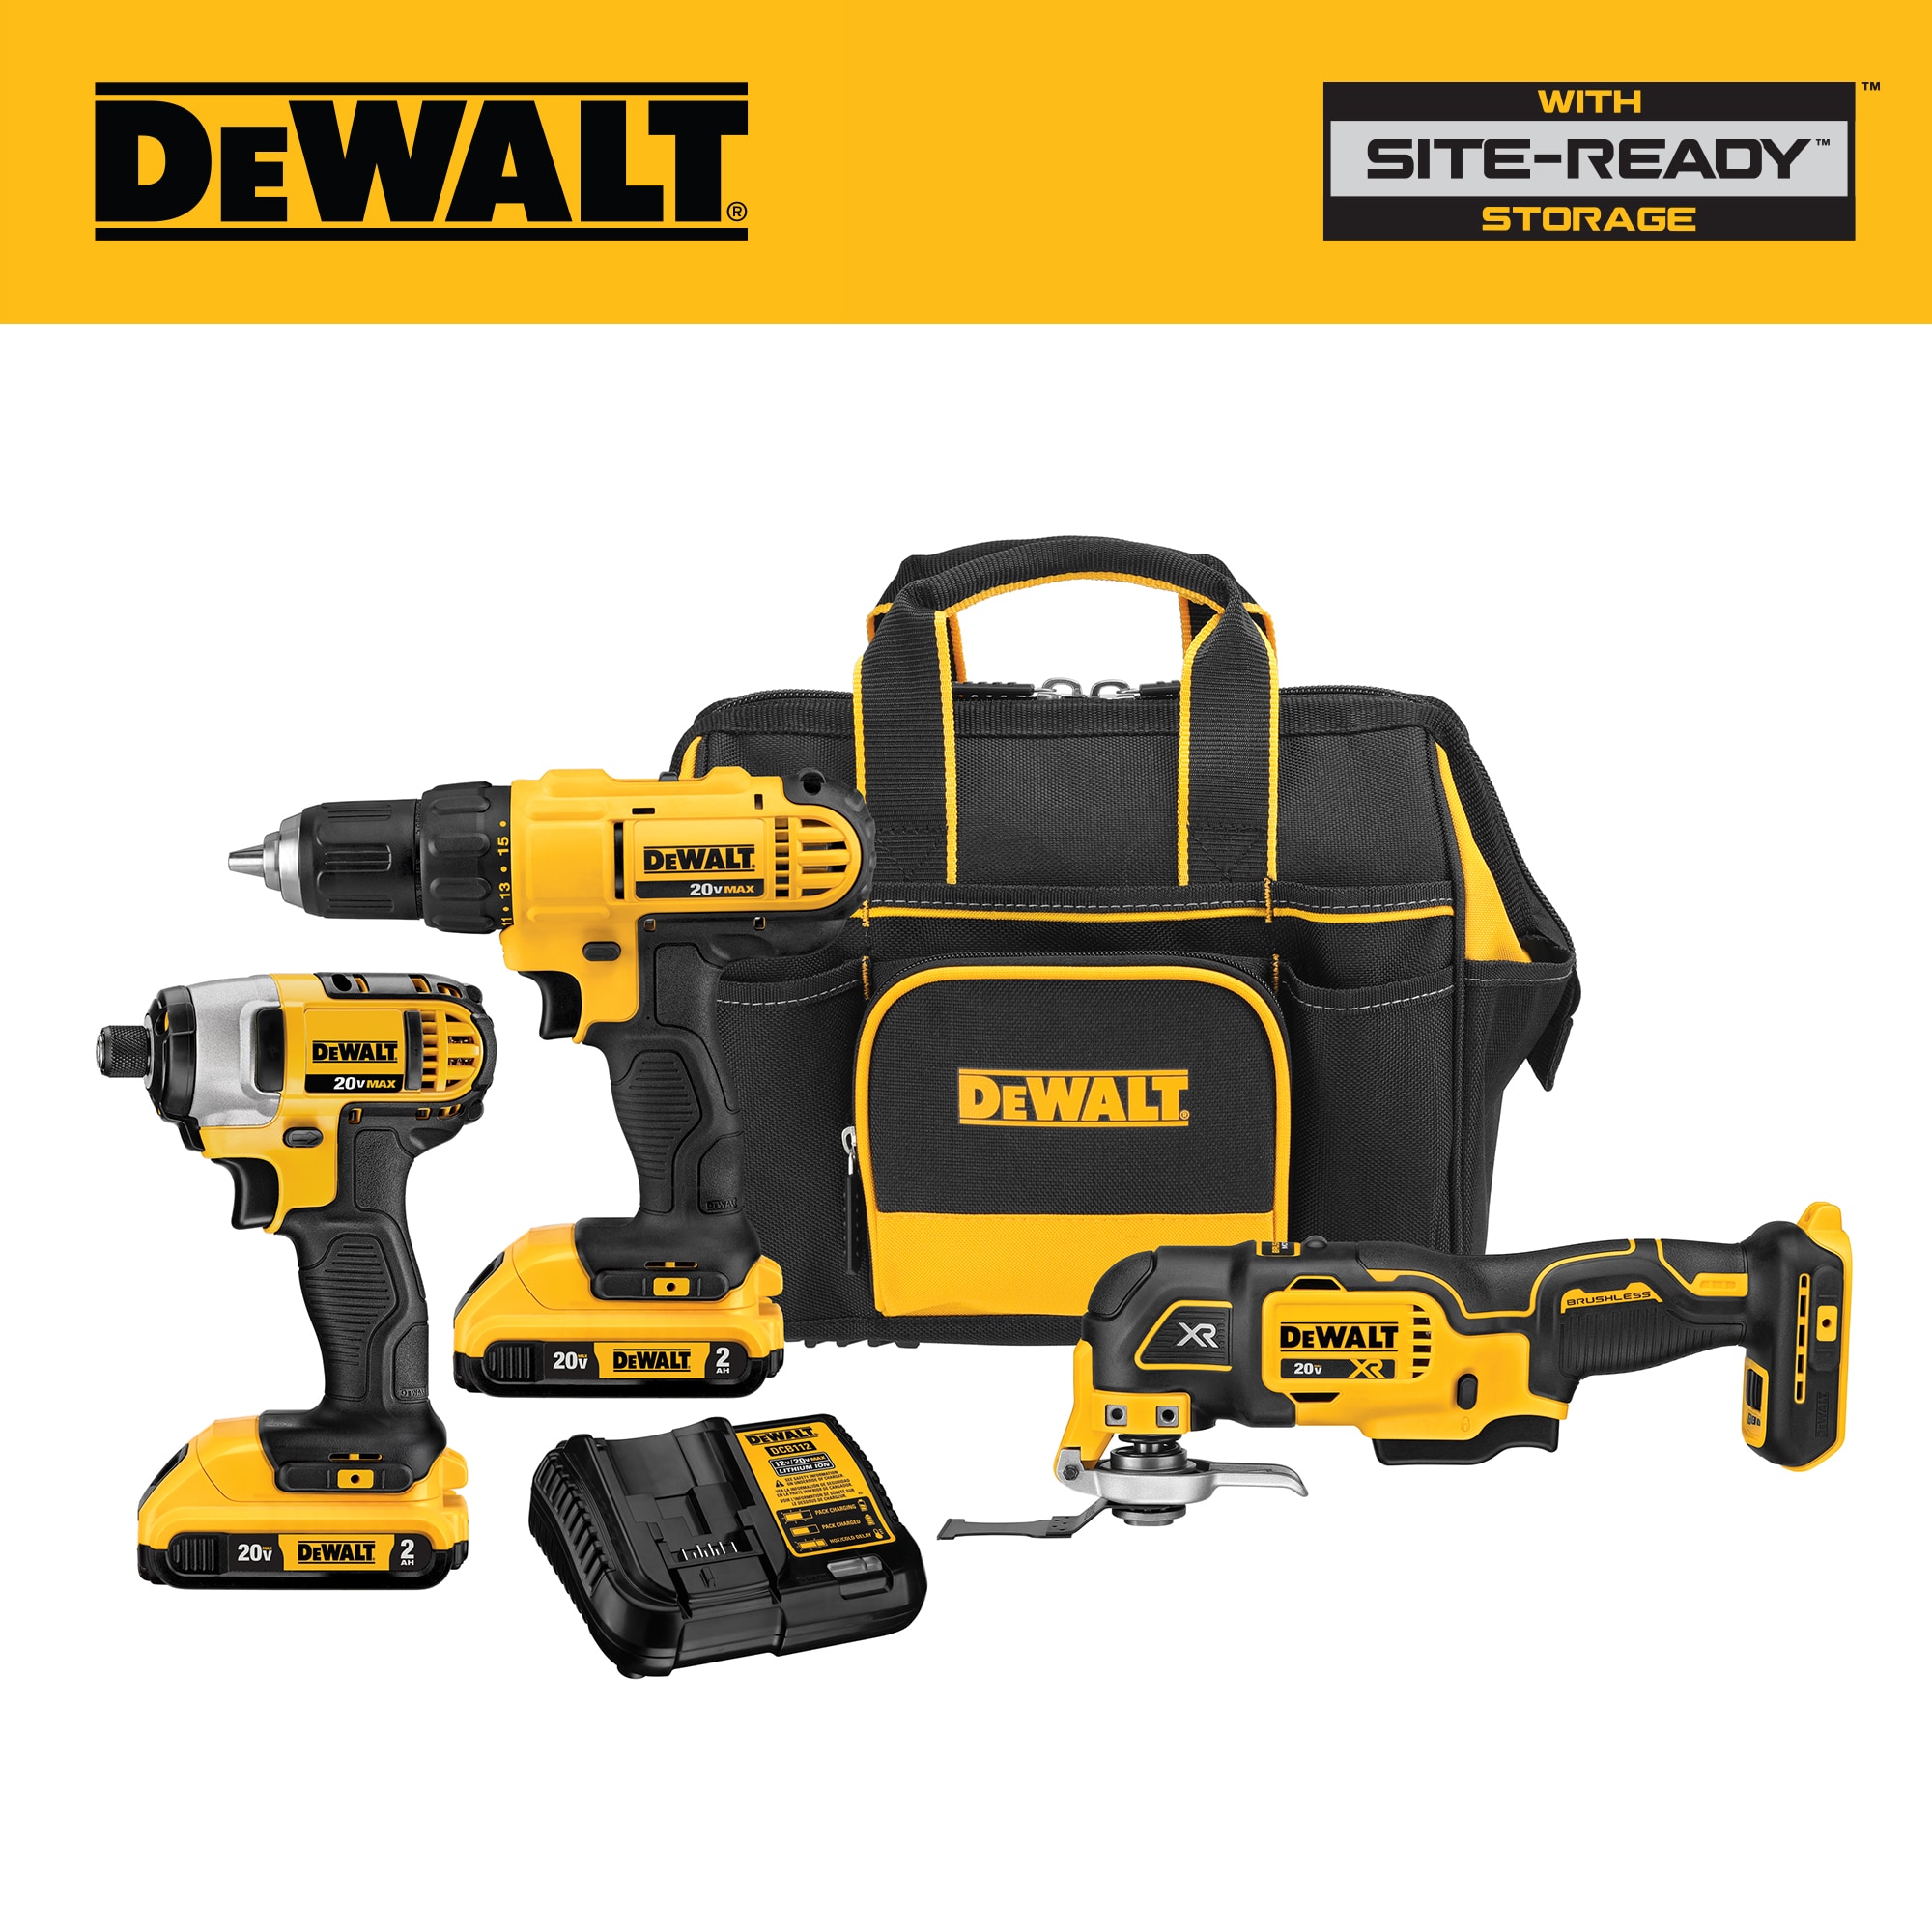 DEWALT 3-Tool 20-Volt Power Tool Combo Kit with Soft Case (2-Batteries and charger Included) the Power Tool Kits department at